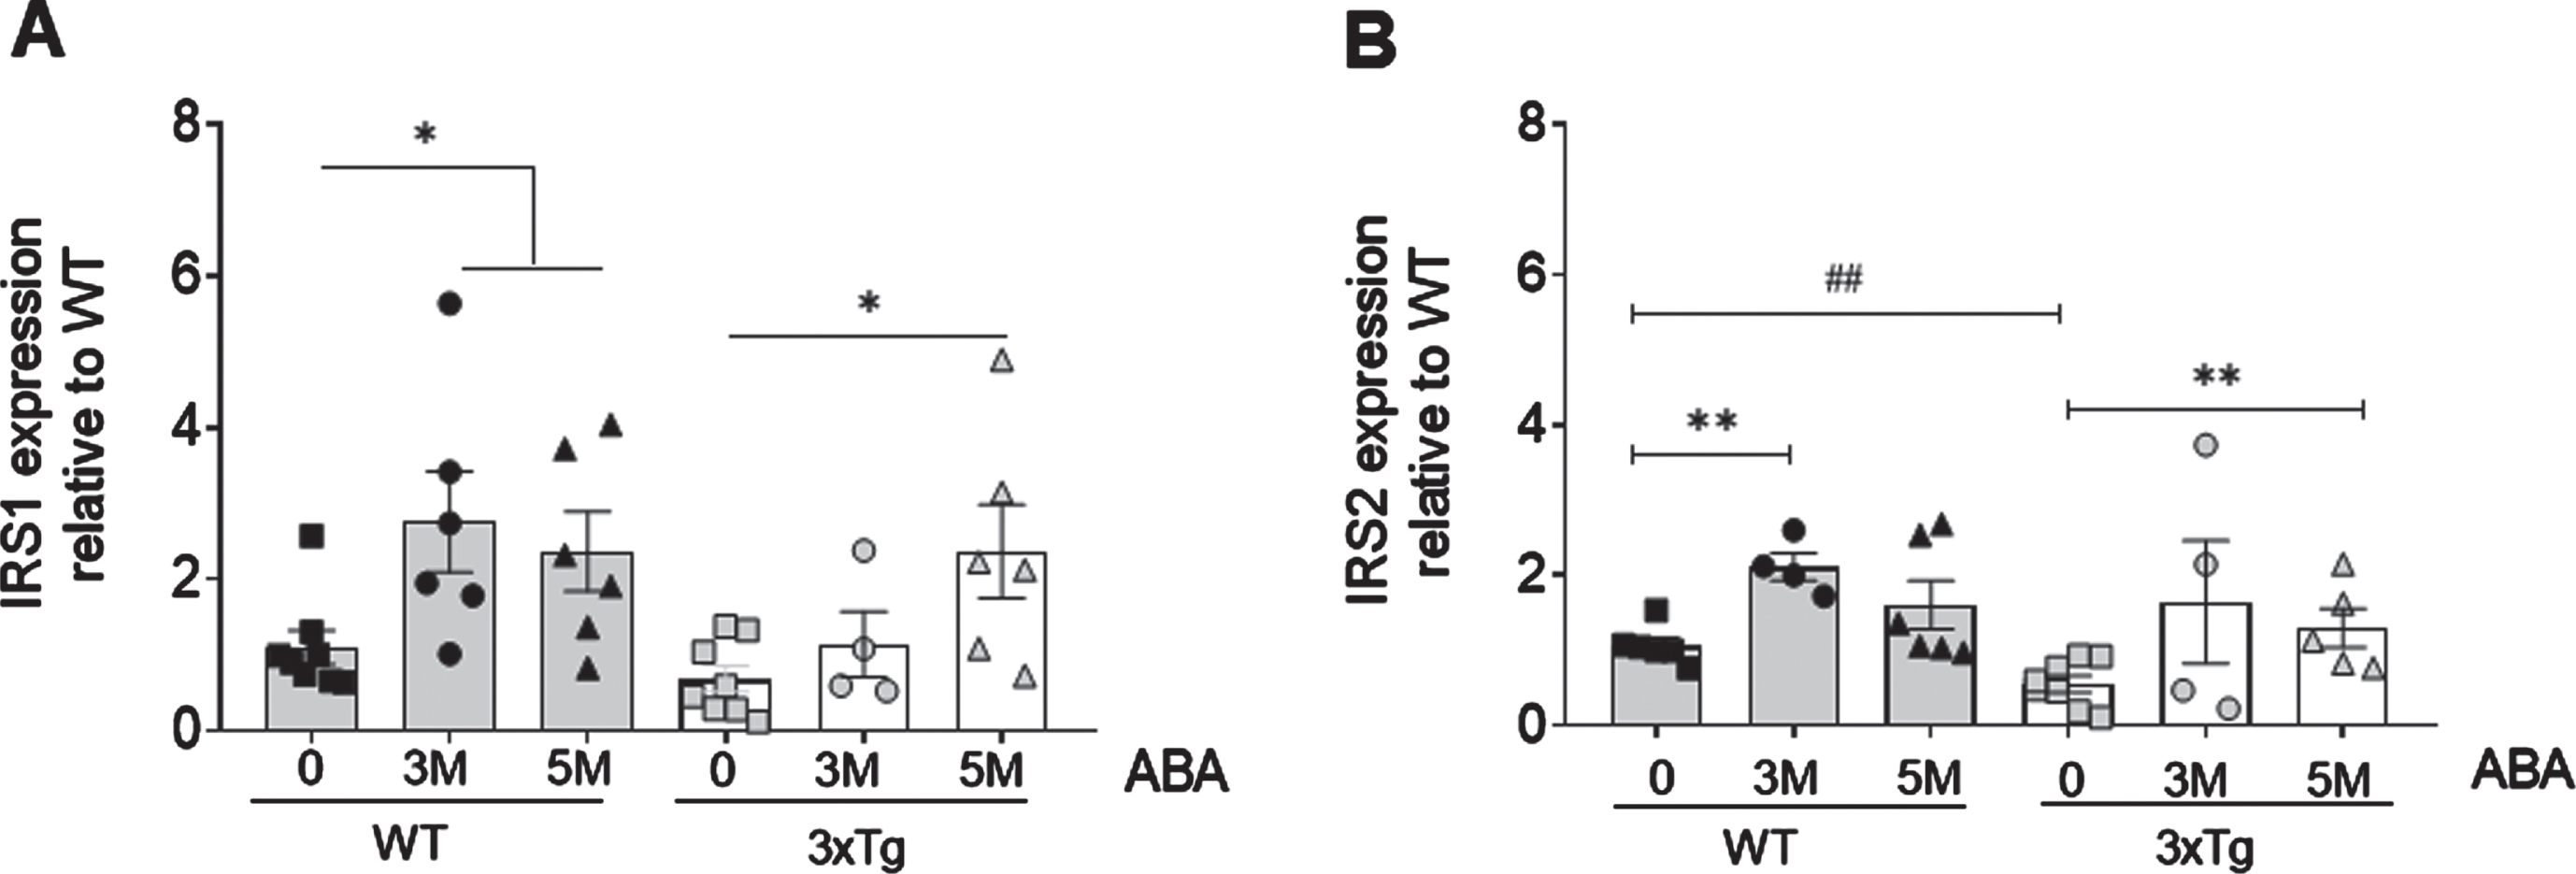 ABA administration increases IRS mRNA expression in hippocampi as measured by qPCR. A) IRS1 expression increases in WT mice as soon as 3 months of ABA treatment, but in 3xTg mice, only at 5 months. B) IRS2 increases in WT animals at 3 months of treatment in WT animals. Data are represented as the mean±of at least 5–9 independent subjects in triplicate. Data were analyzed by Student t-test (*p < 0.05 and **p < 0.01 for ABA effect, and # #p < 0.01 for genotype effect).